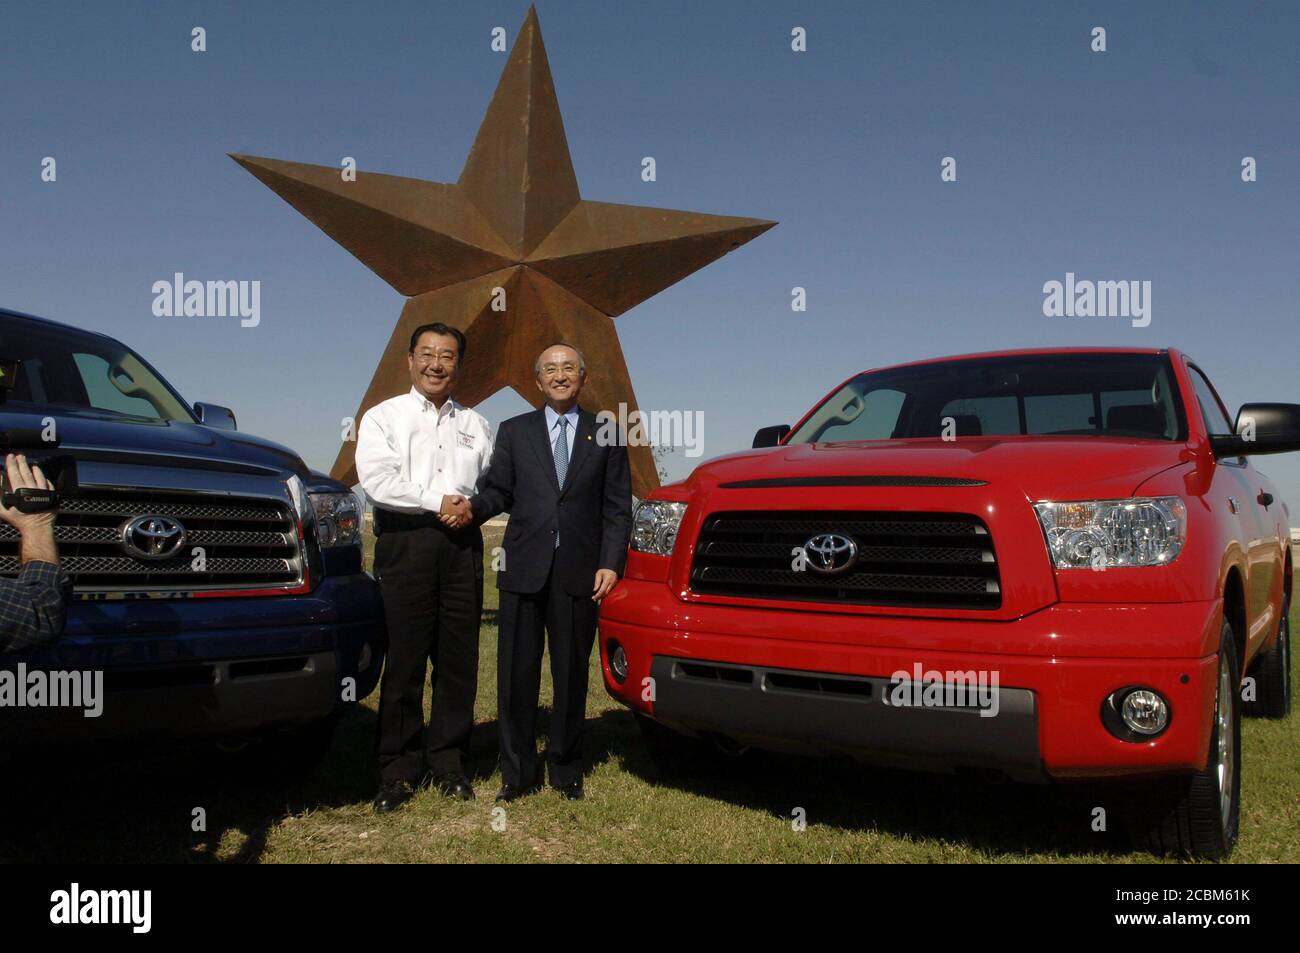 San Antonio, Texas November 17, 2006: Toyota Motor Company CEO  Katsuaki Watanabe (right) poses plant president T.J. Tajima (left) with the first two Toyota Tundra pickups off the assembly line at Toyota Motor Manufacturing's new south Texas assembly plant in Bexar County. The $1.28-billion dollar facility employs about 1,800 workers.    ©Bob Daemmrich / Stock Photo